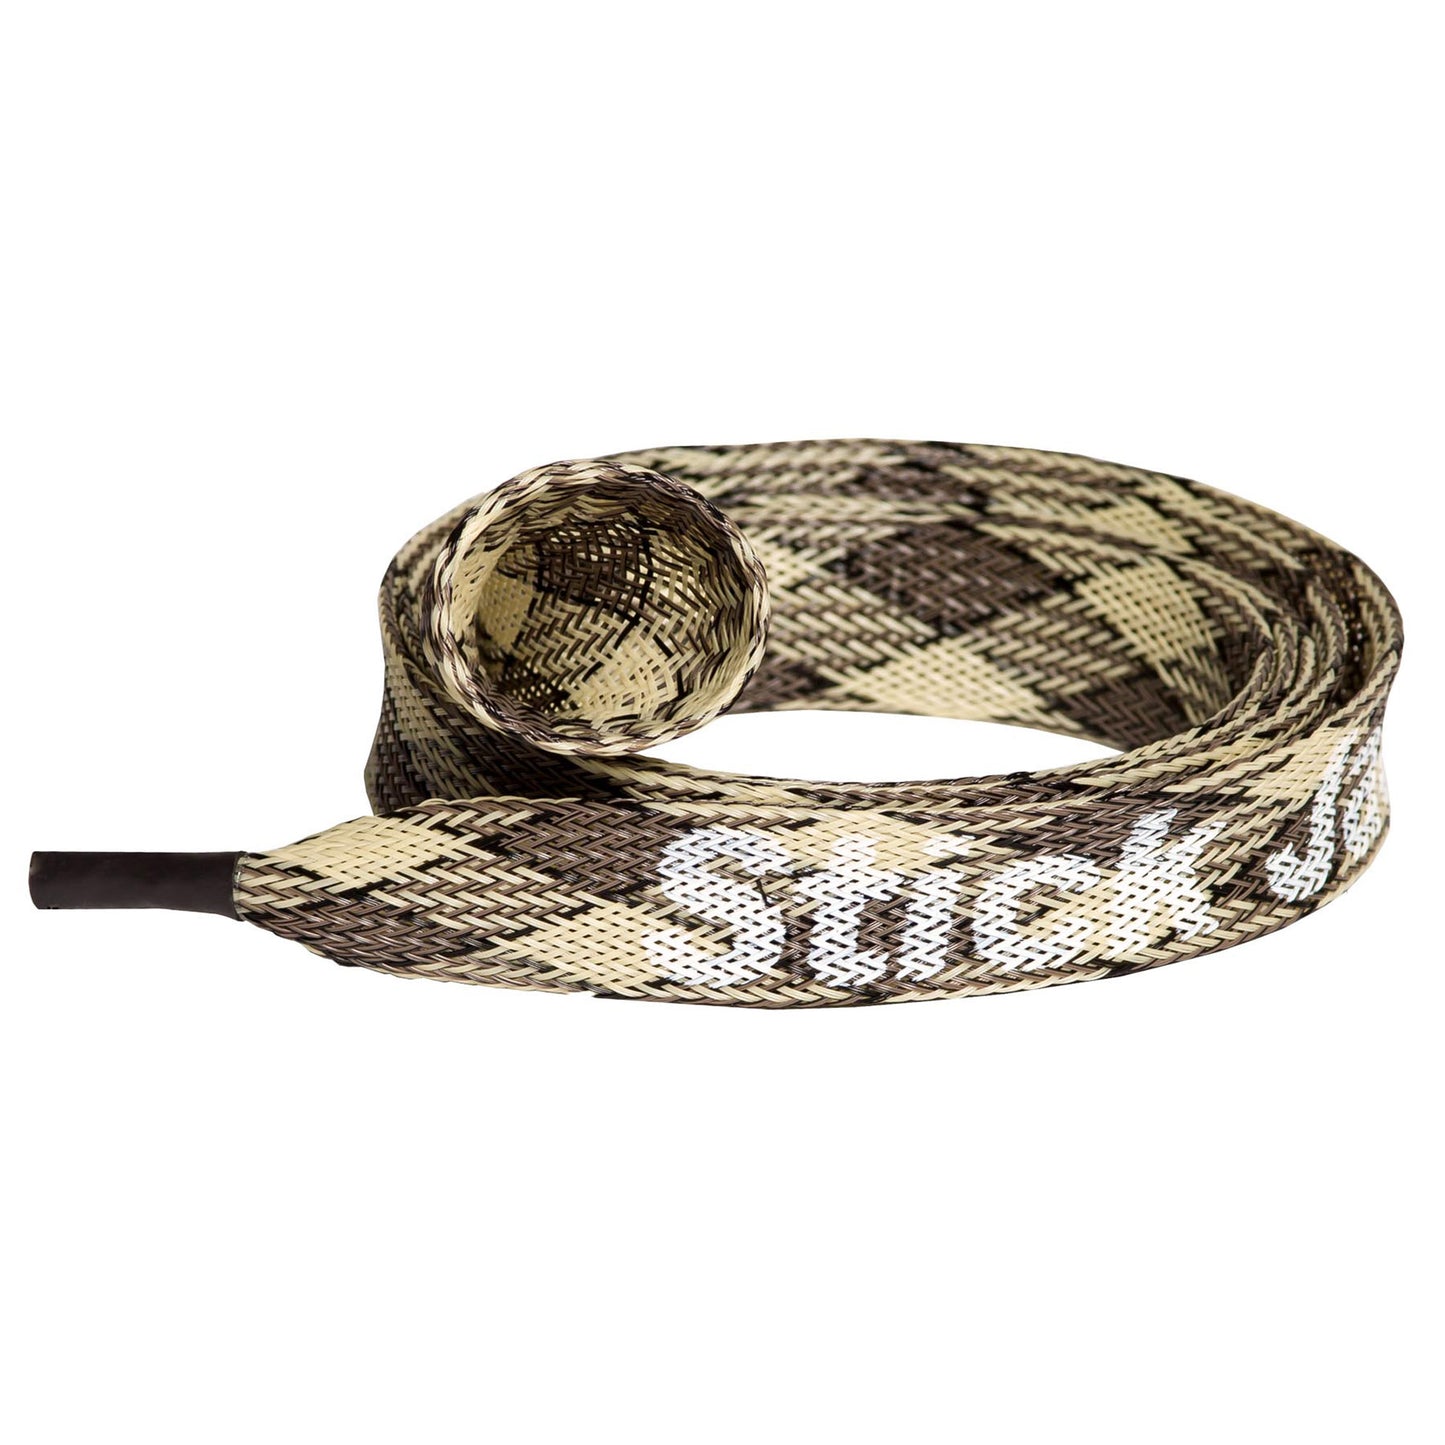 Rattlesnake Casting Stick Jacket® Fishing Rod Cover For Rods up to 7-1/2'